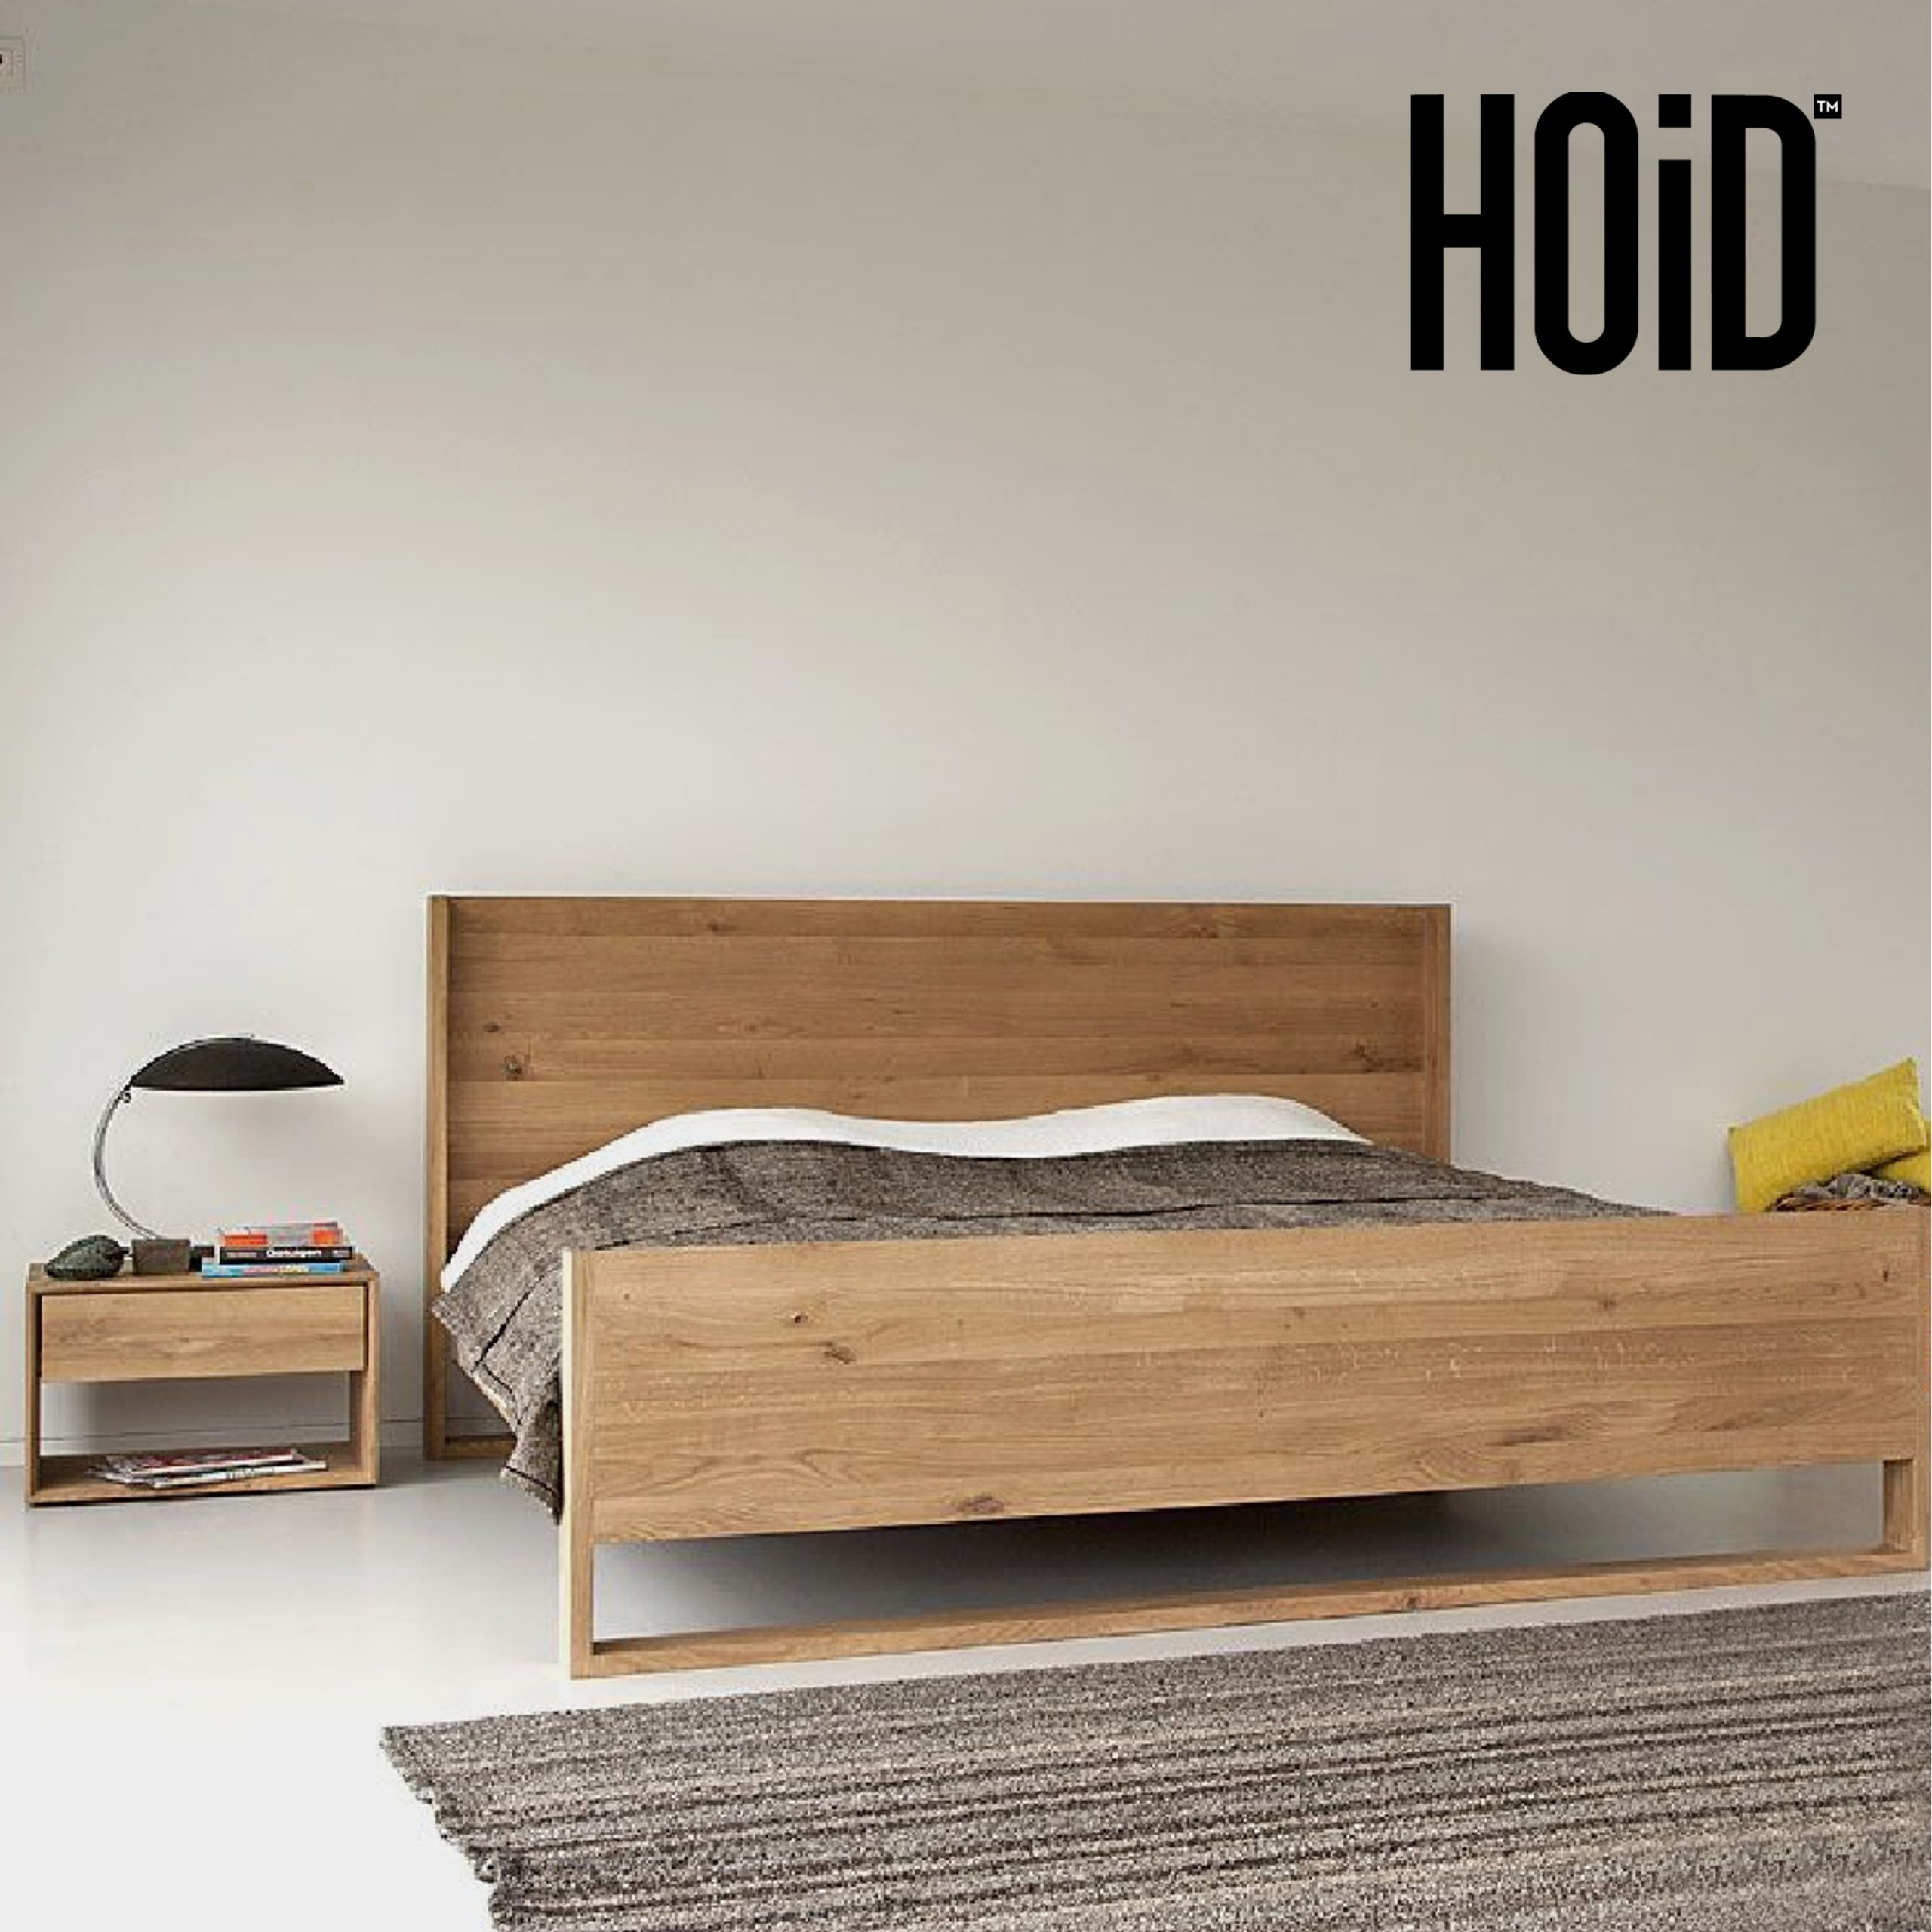 todo-bed-with-2-sidetables-scaled-2.jpg